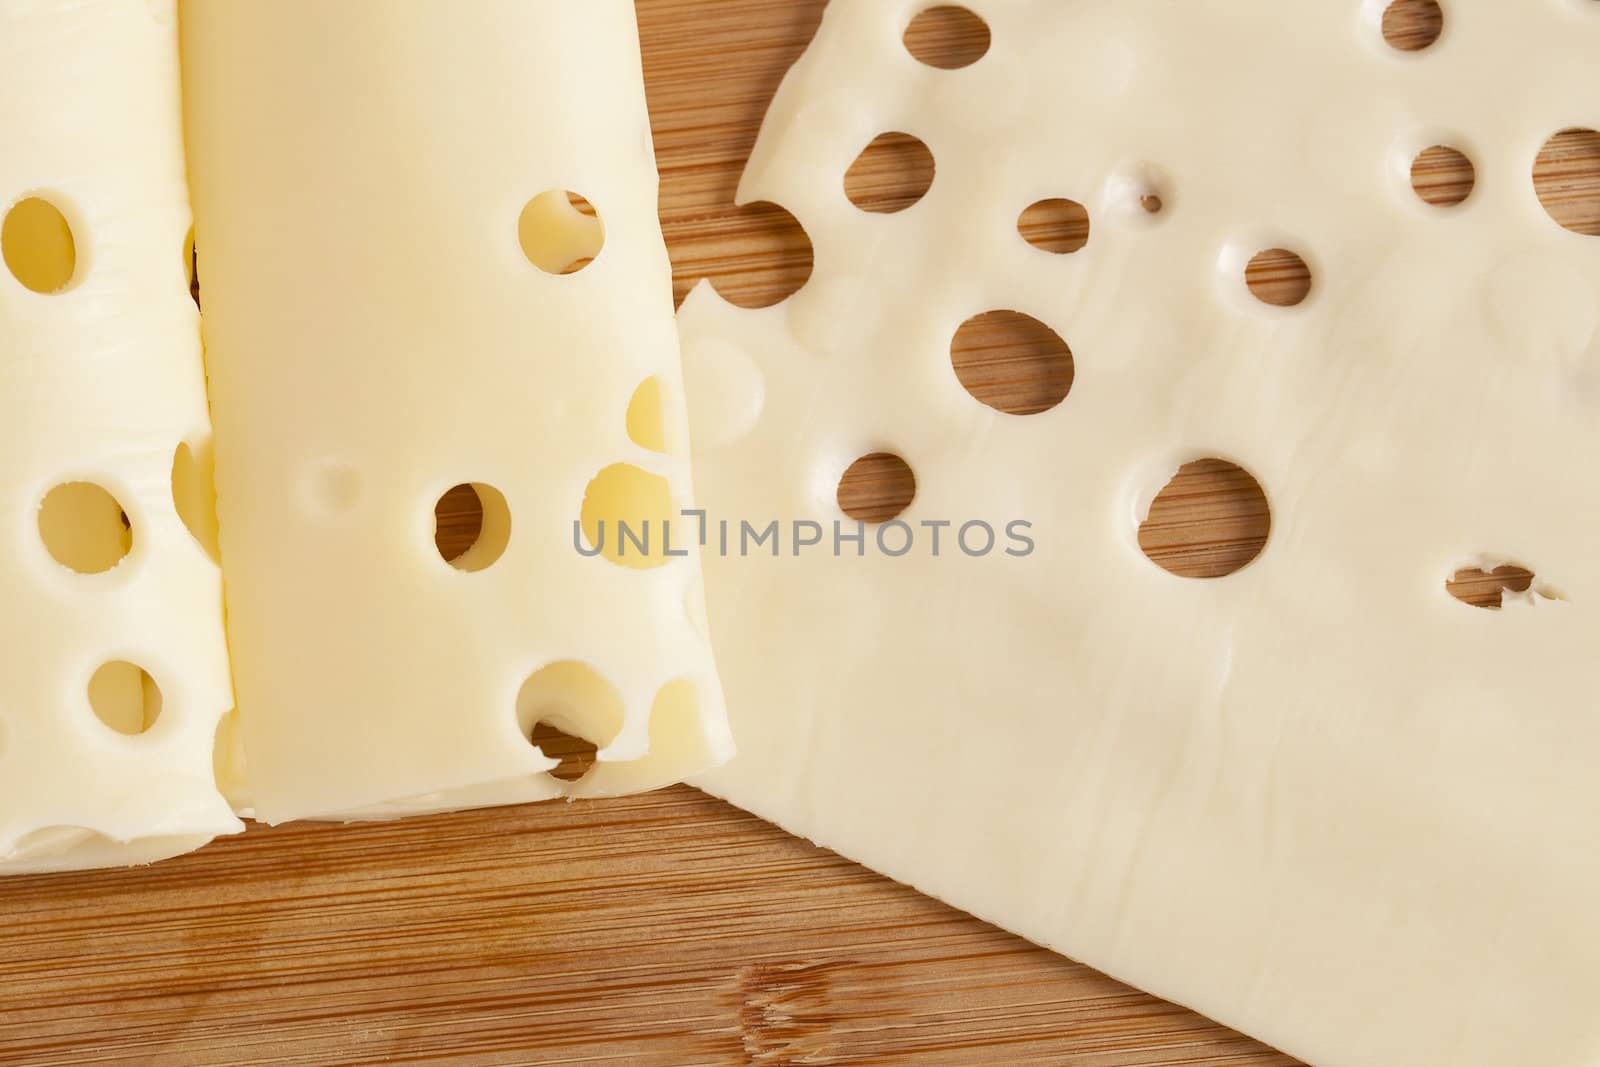 Thin slices of cheese over a wooden background